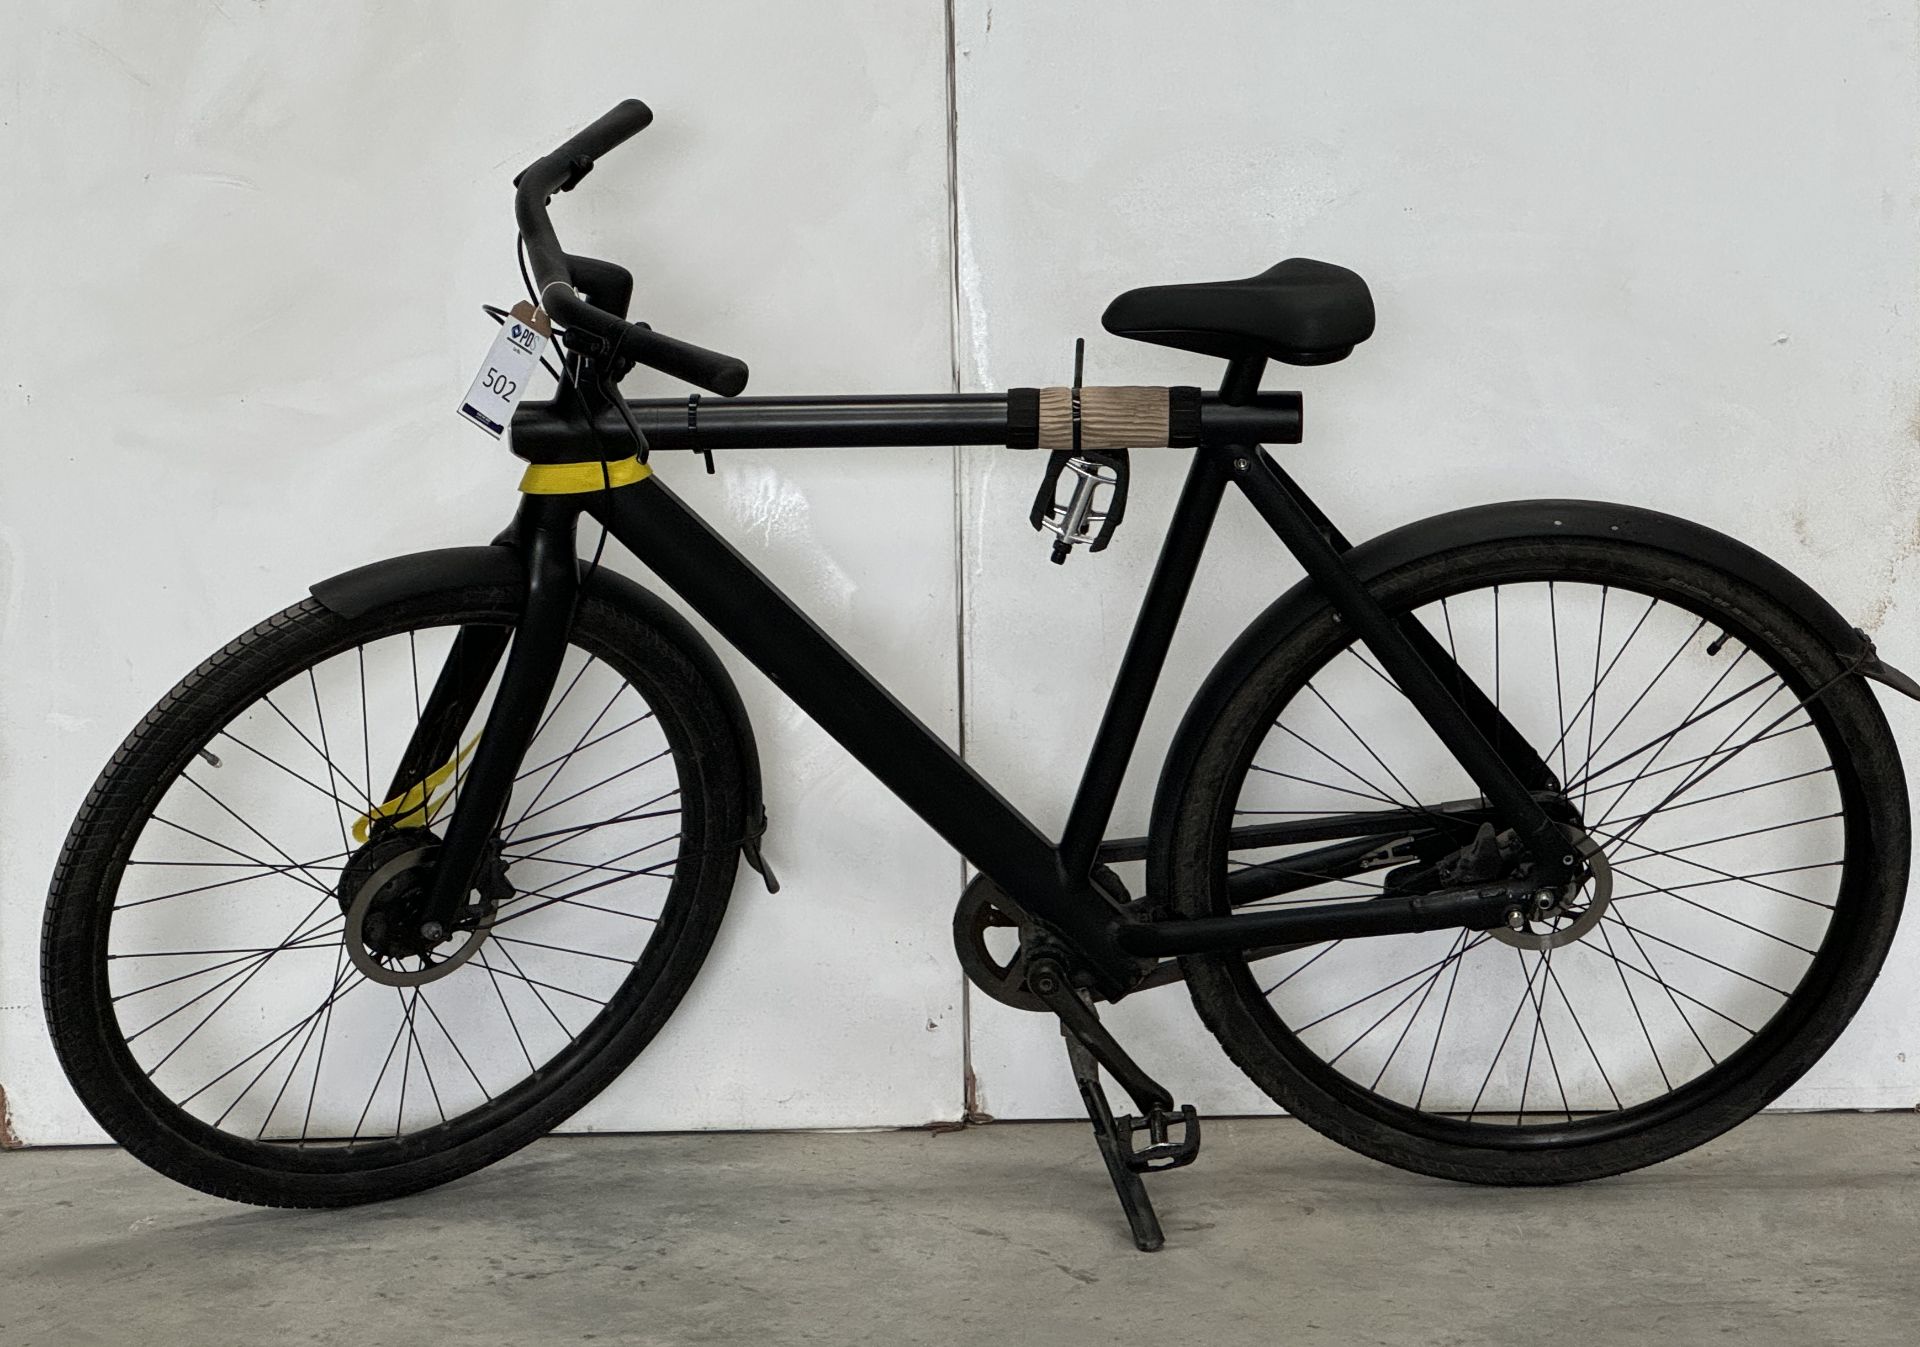 VanMoof S3 Electric Bike, Frame Number ASY3118402 (NOT ROADWORTHY - FOR SPARES ONLY) (No codes